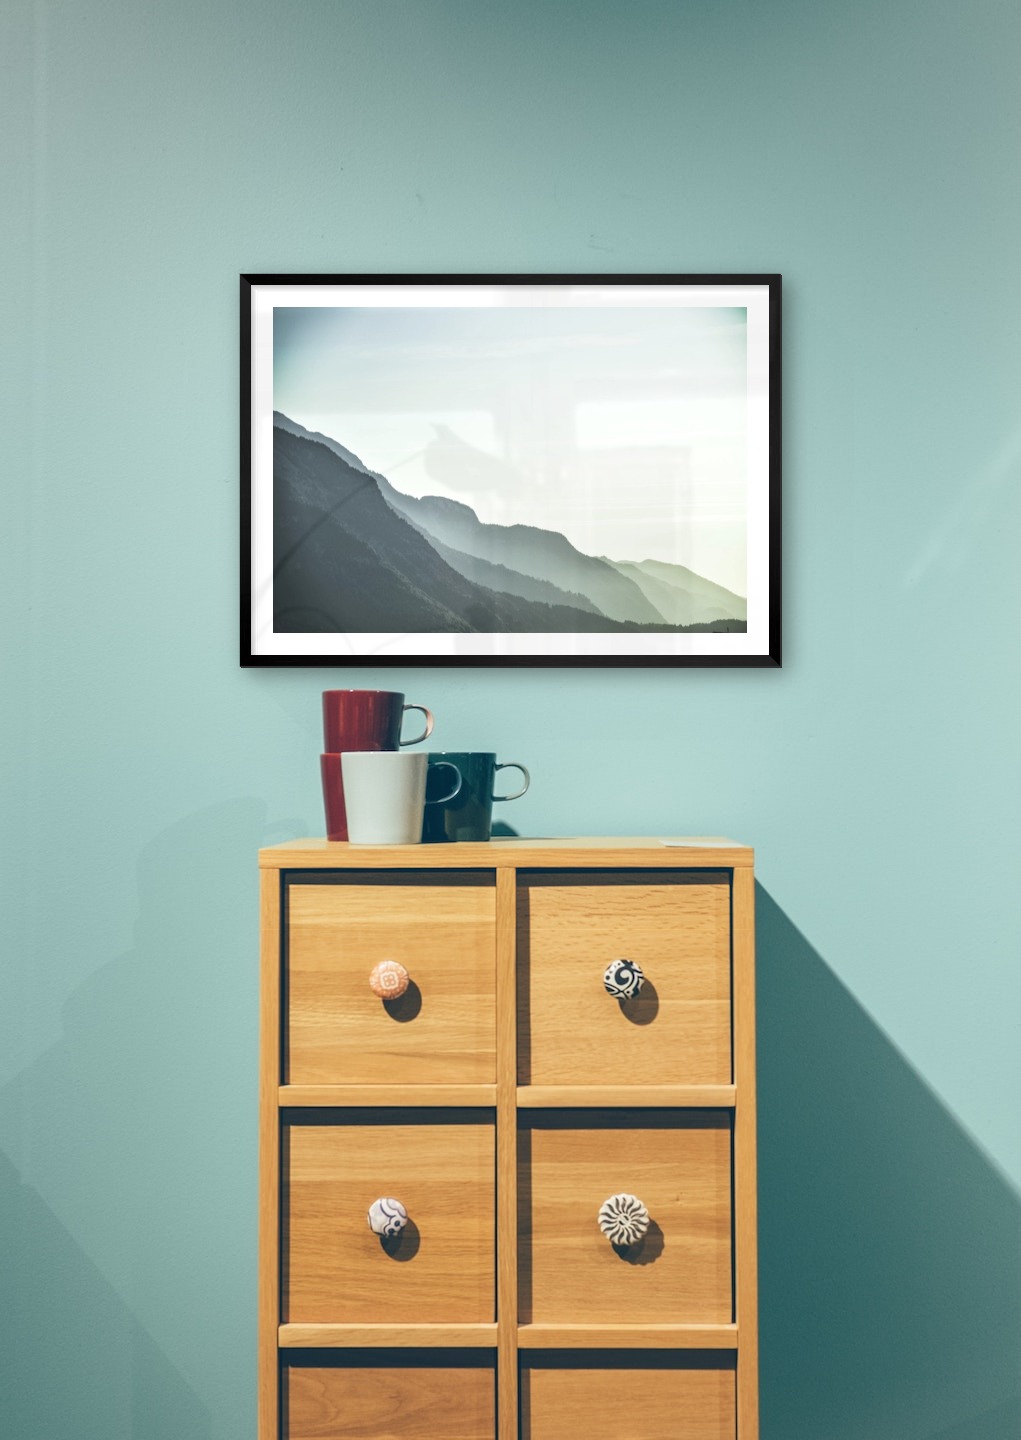 Gallery wall with picture frame in black in size 50x70 with print "Foggy mountain"